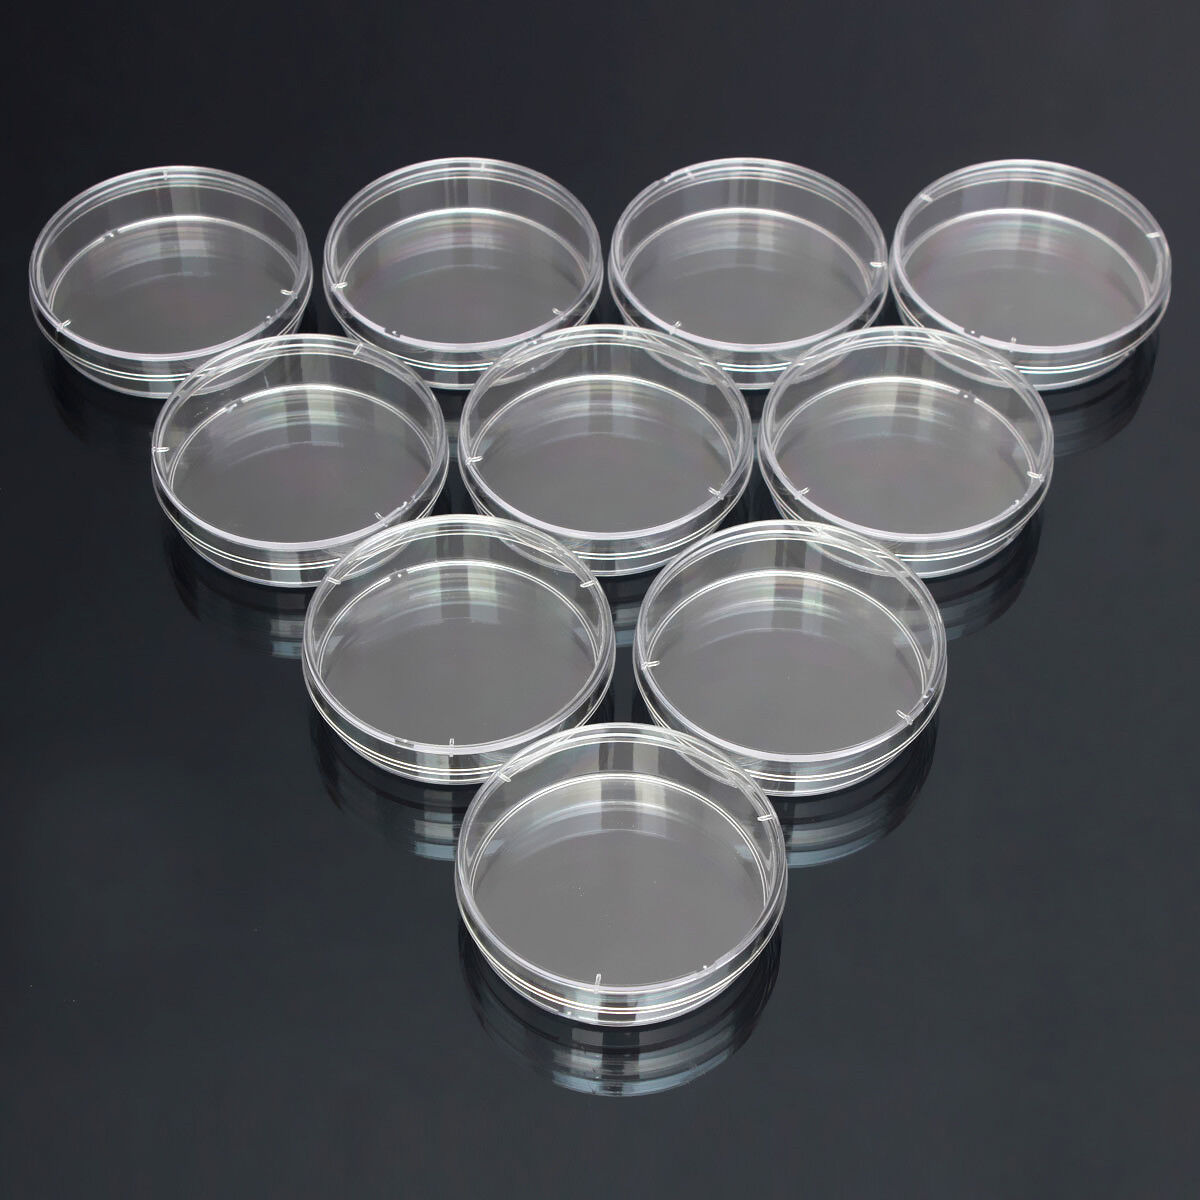 1 Pack Of 10PCS Transparent Sterile Max 57% OFF Max 79% OFF Petri Dishes x 55 15 mm For